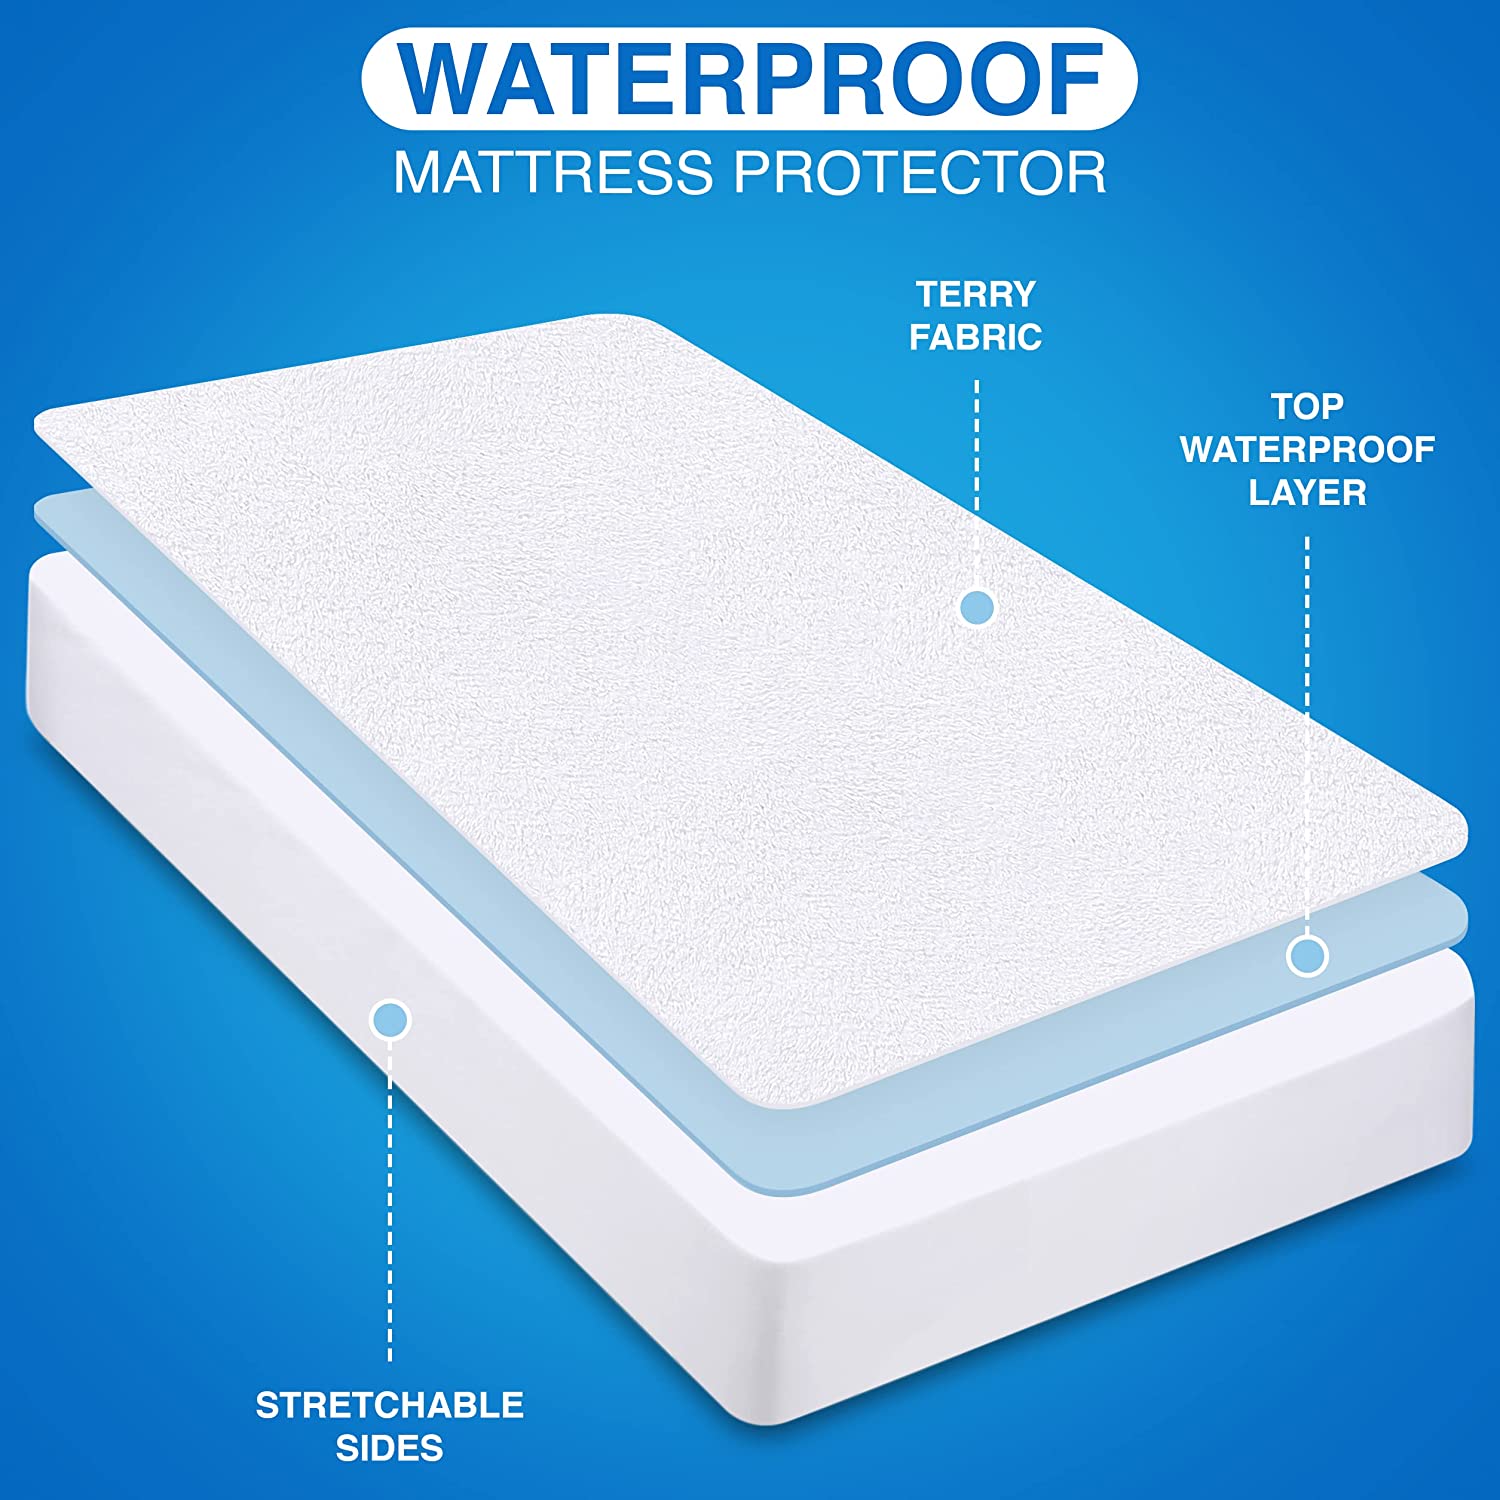 Waterproof & Breathable Terry Cotton mattress protector